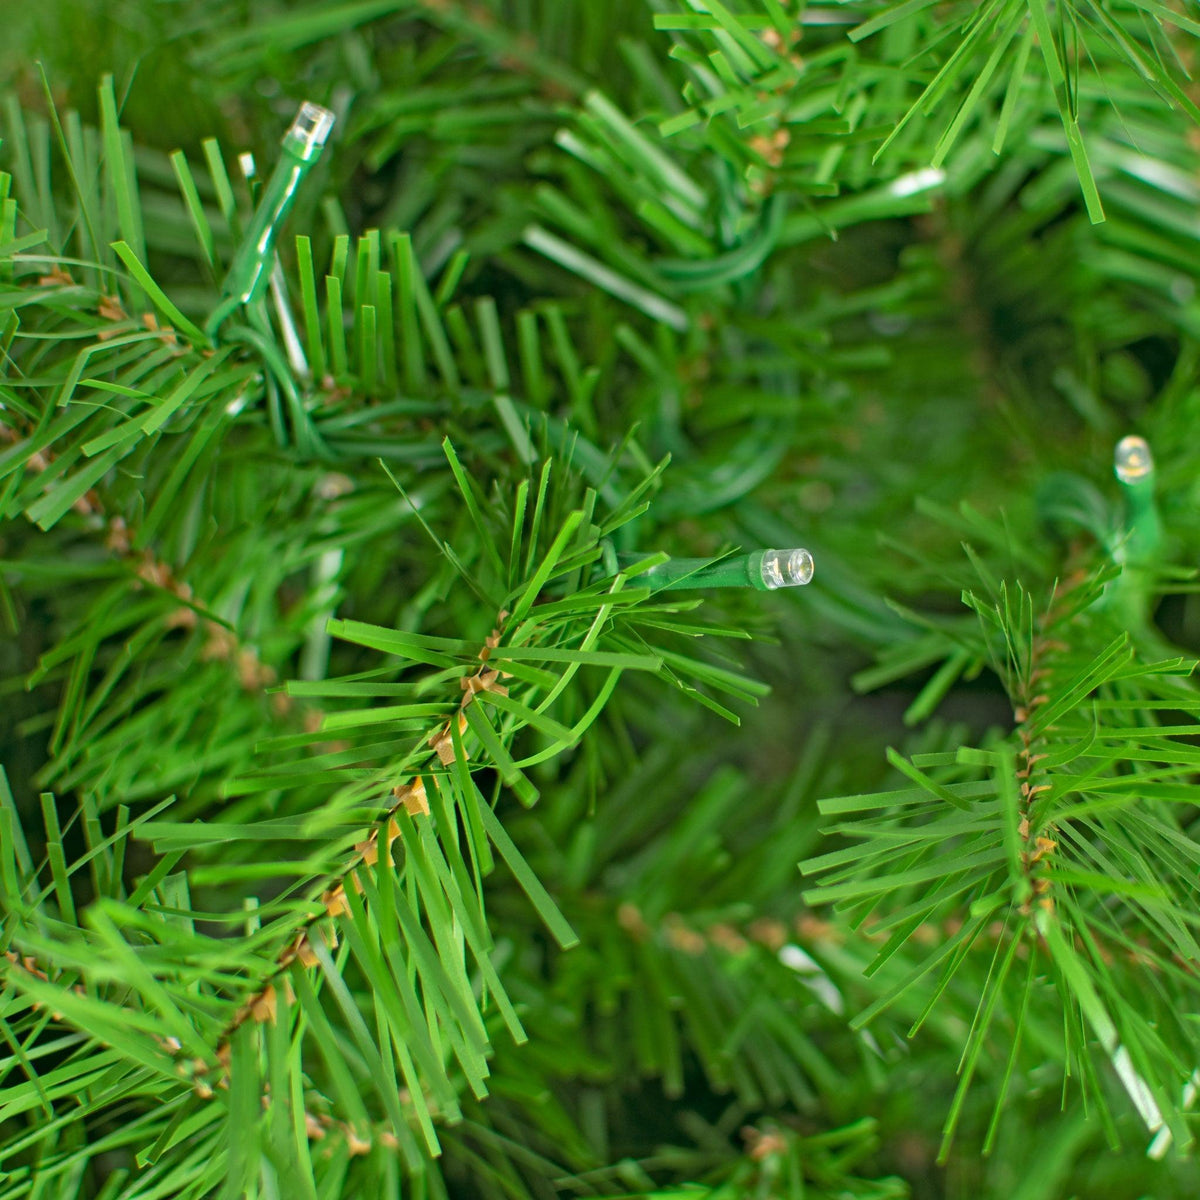 Closeup photo of the LED Lights on some of the branches. 10FT Premier Pine Tree Pre-Lit with LED Lights.  On sale from leedisplay.com